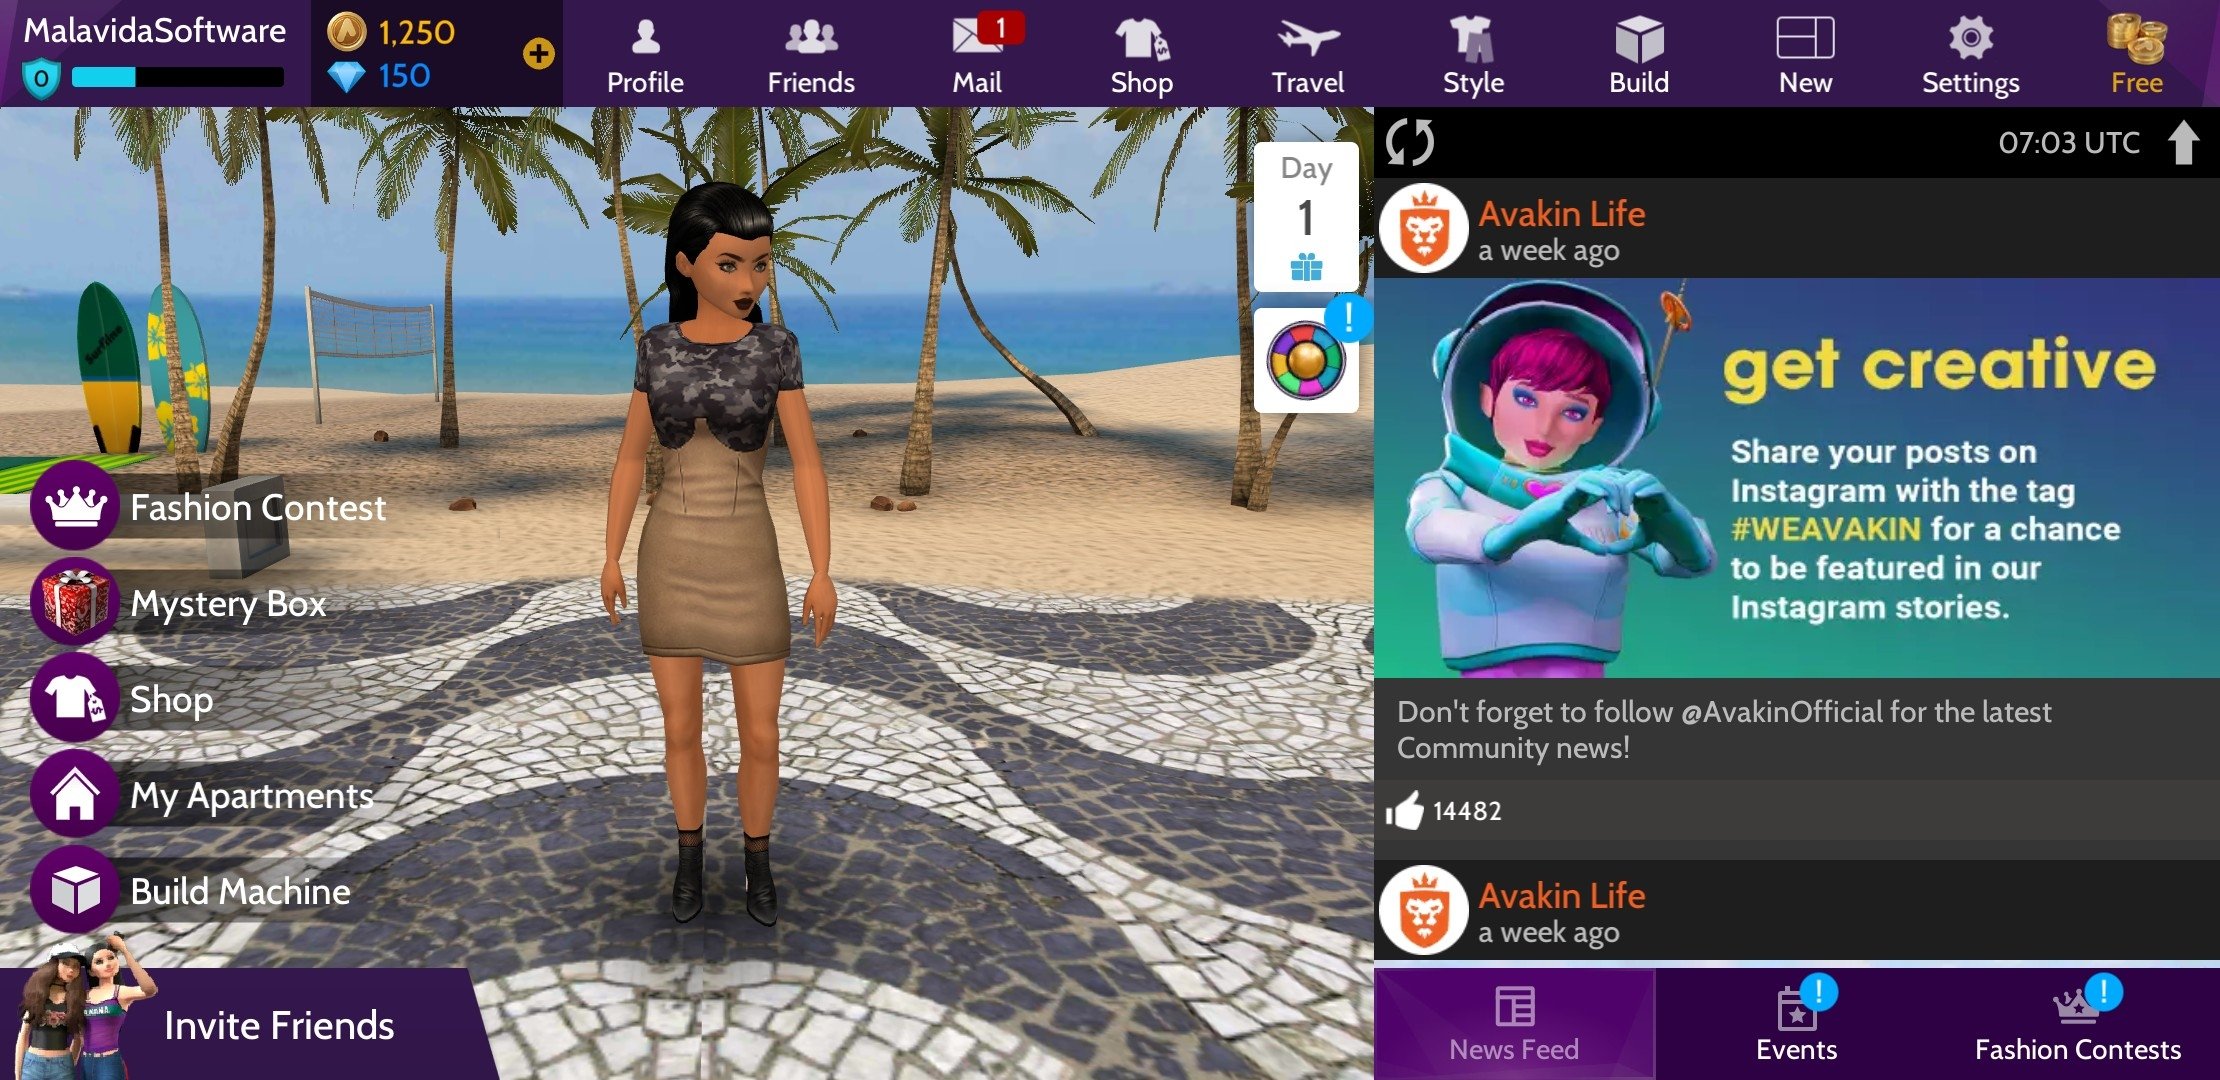 avakin life cheats for coins 2018 on phone